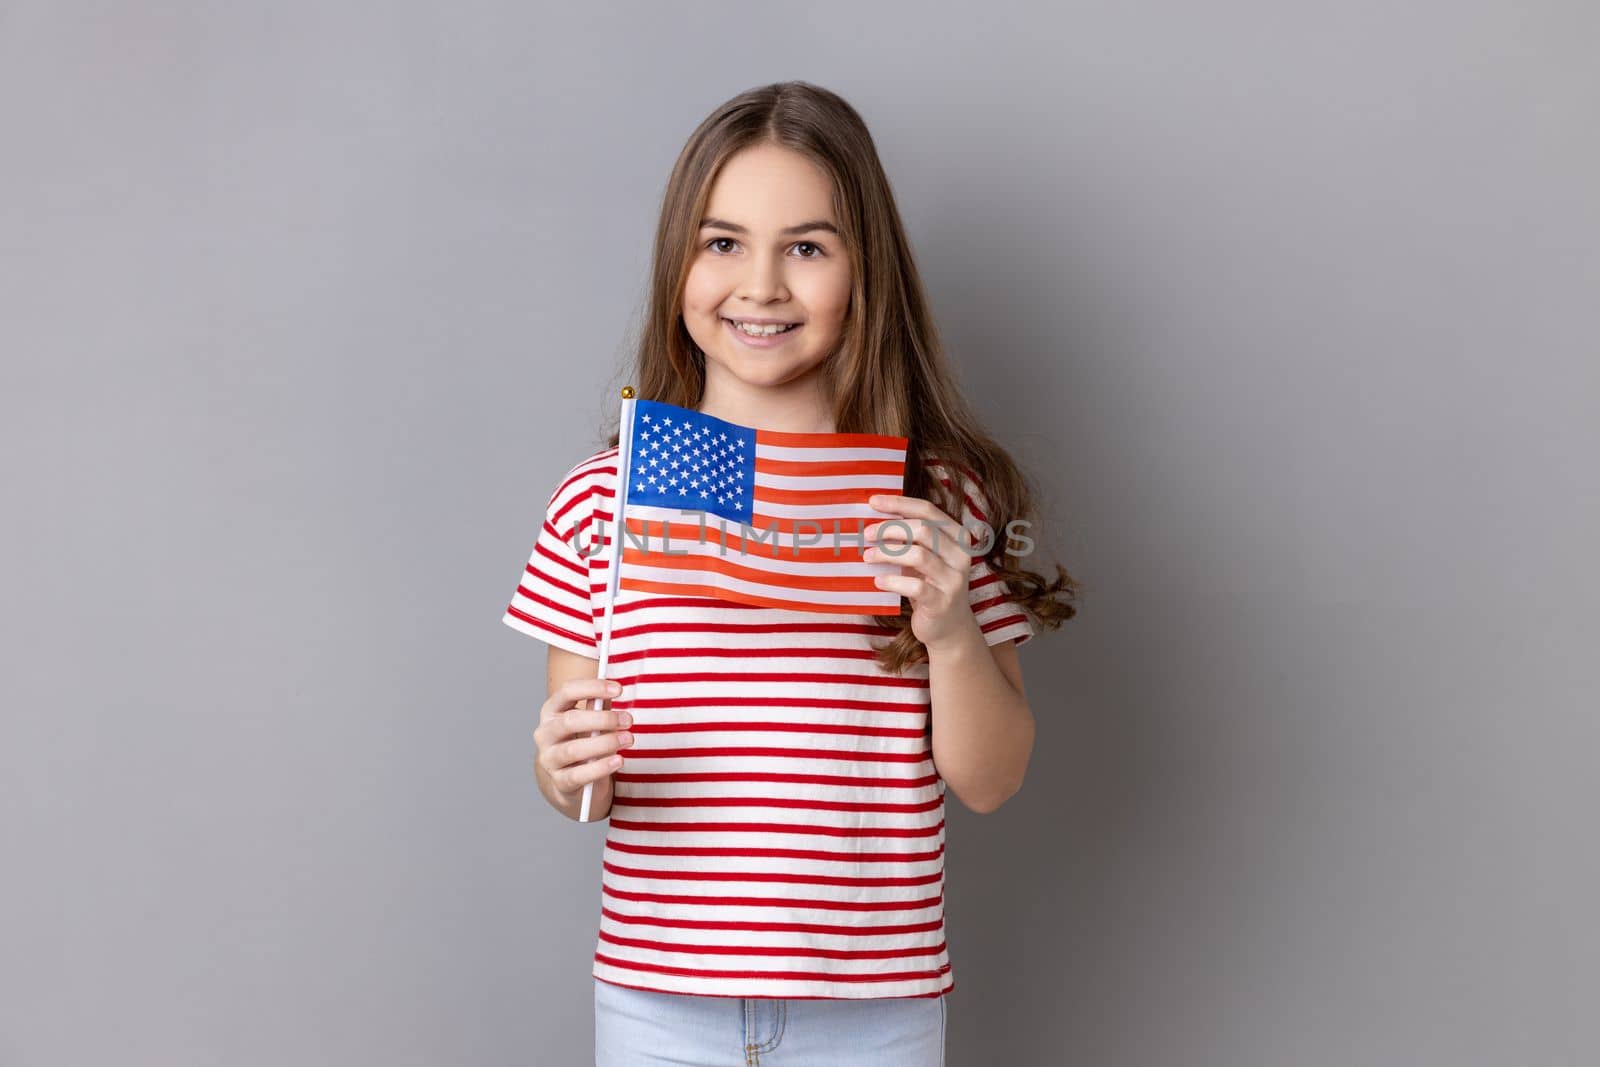 American flag. Portrait of delighted happy adorable cute little girl wearing striped T-shirt holding flag of United States of America, looking at camera. Indoor studio shot isolated on gray background